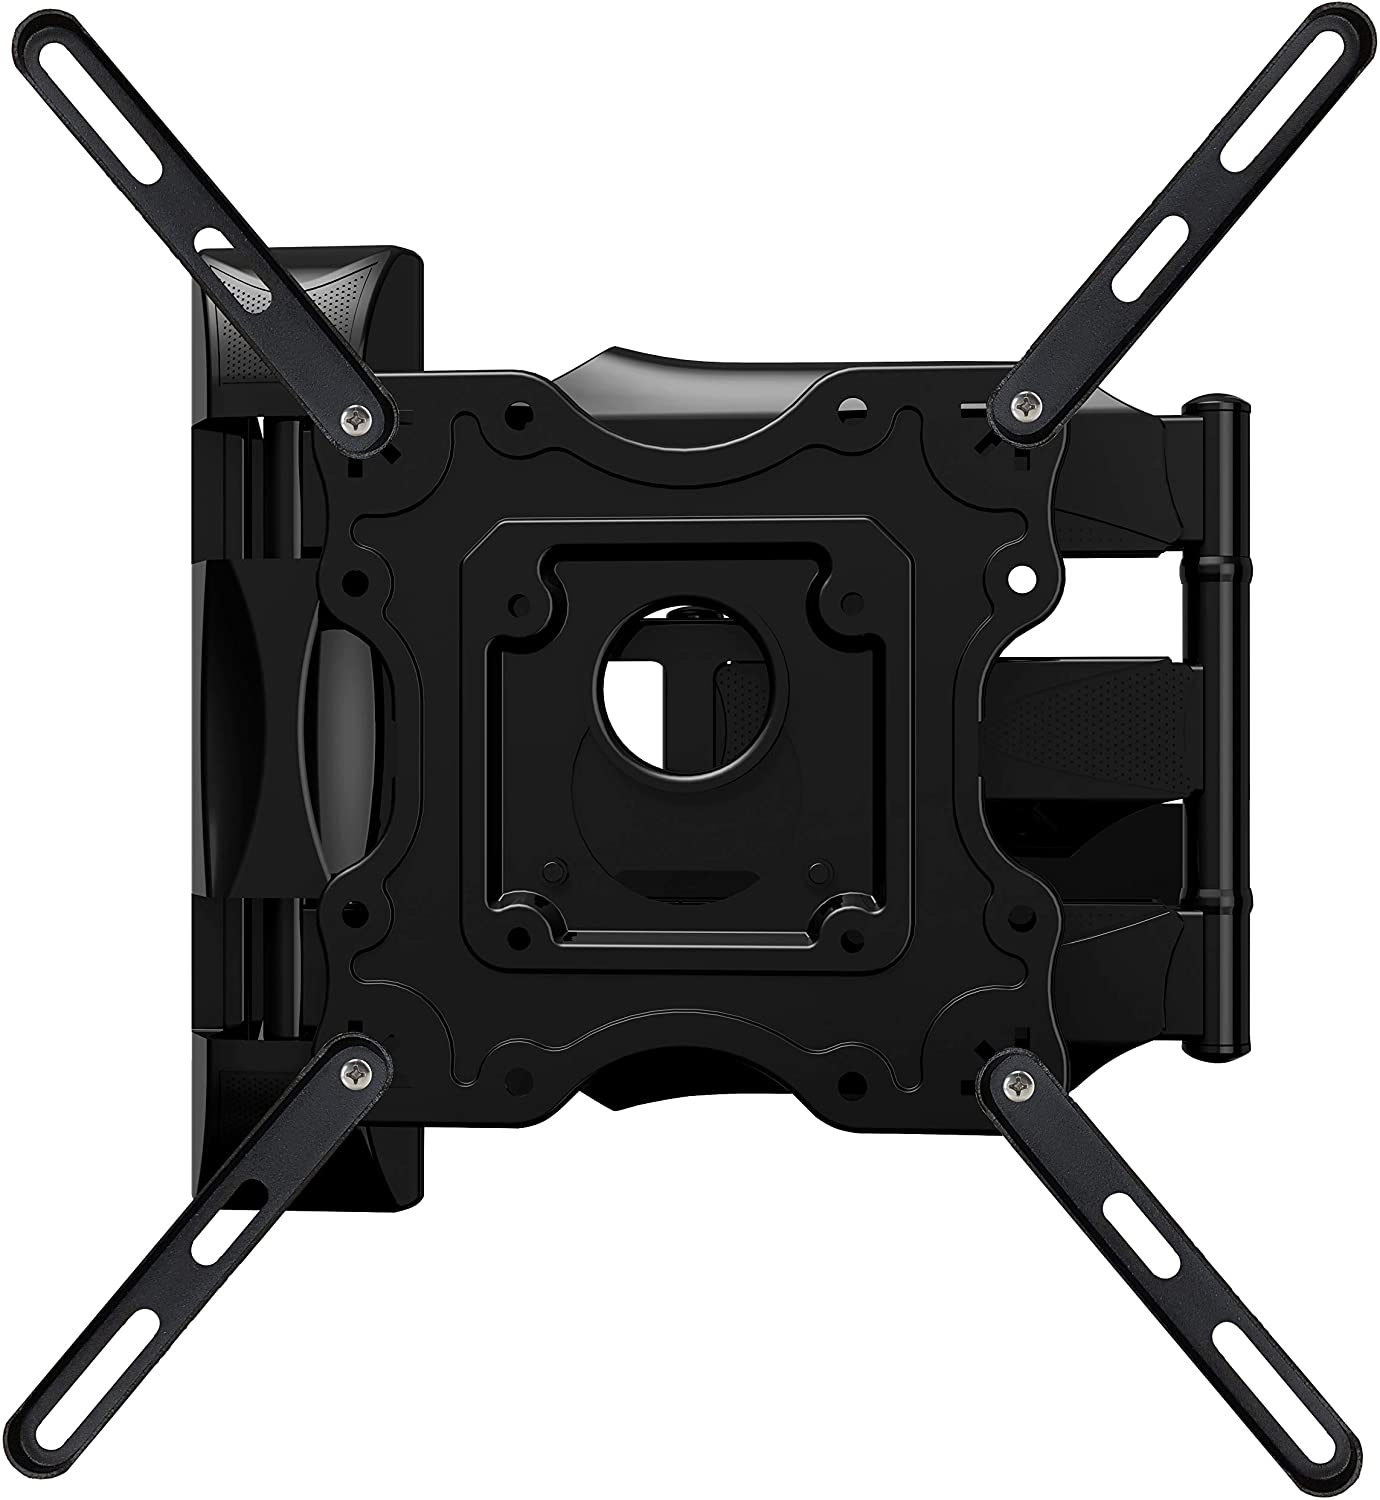 Suitable For TV Screens 26” 55” Invision® VESA Adapter Kit For TV Wall Mounted Brackets Ultra Slim Design Fits Straight On To Any 200mm x 200mm Existing TV Bracket To Achieve A Wide Arrangement Of Additional VESA Hole Patterns 